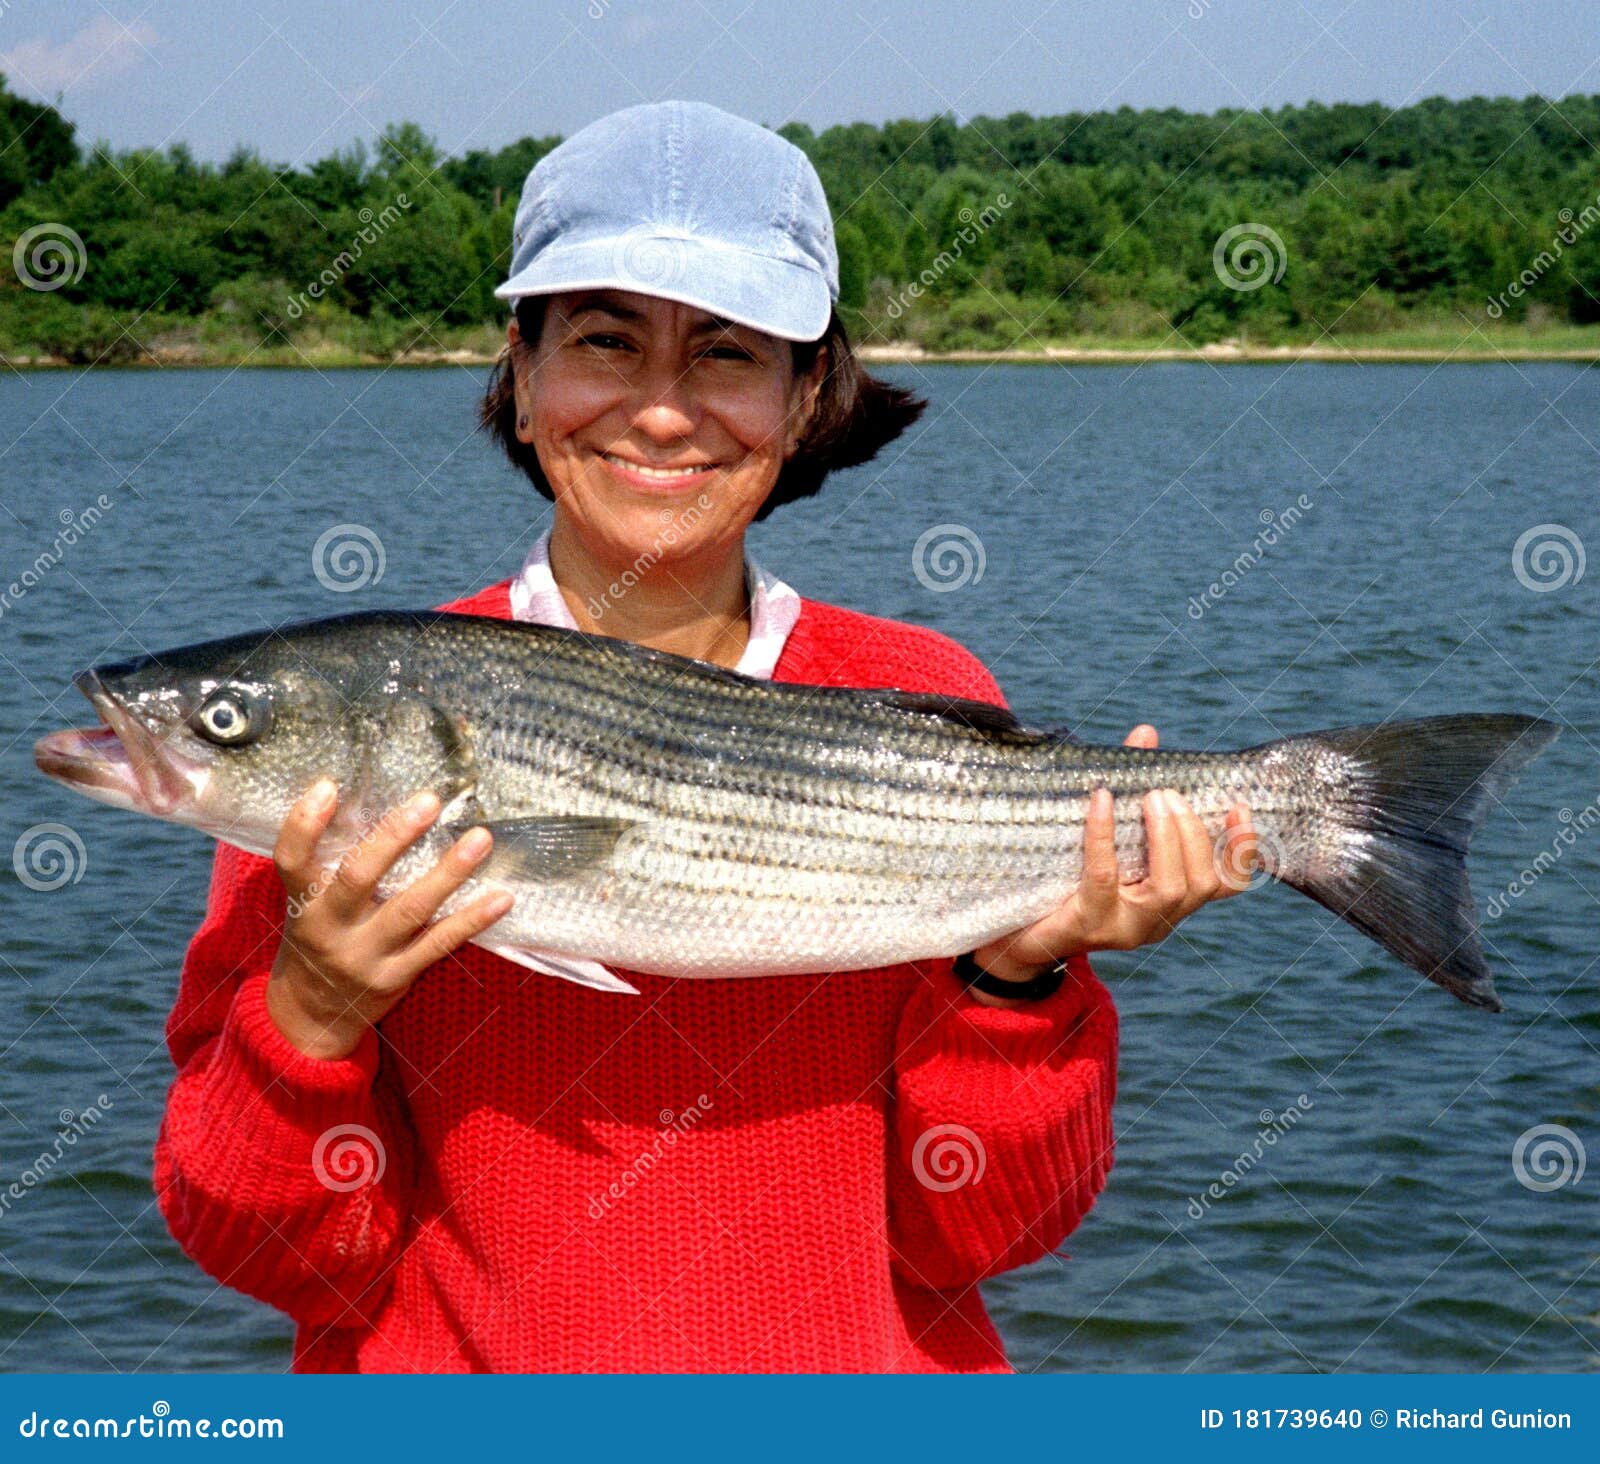 woman with 10 lb striped bass